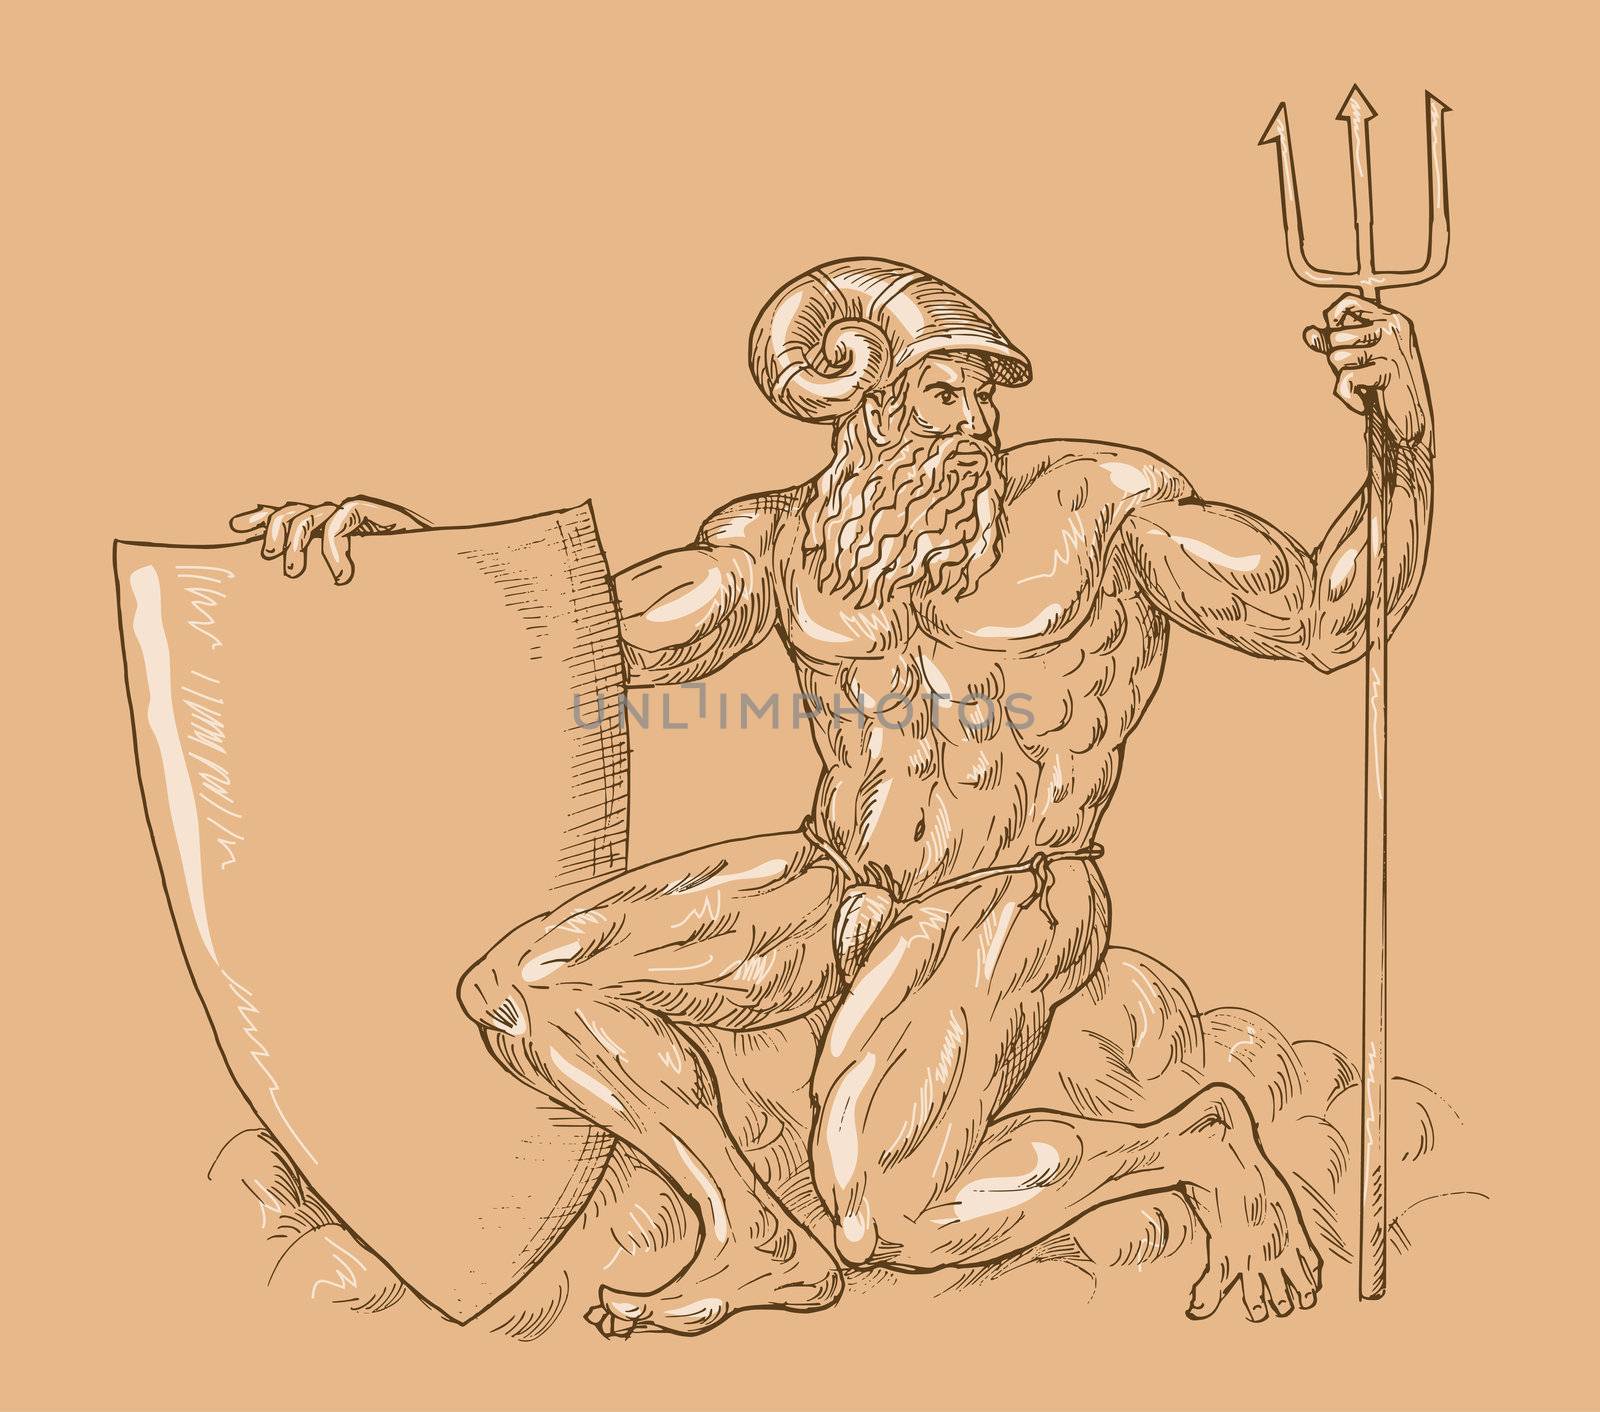 hand drawn and sketch illustration of Roman God Neptune or poseidon with trident and shield